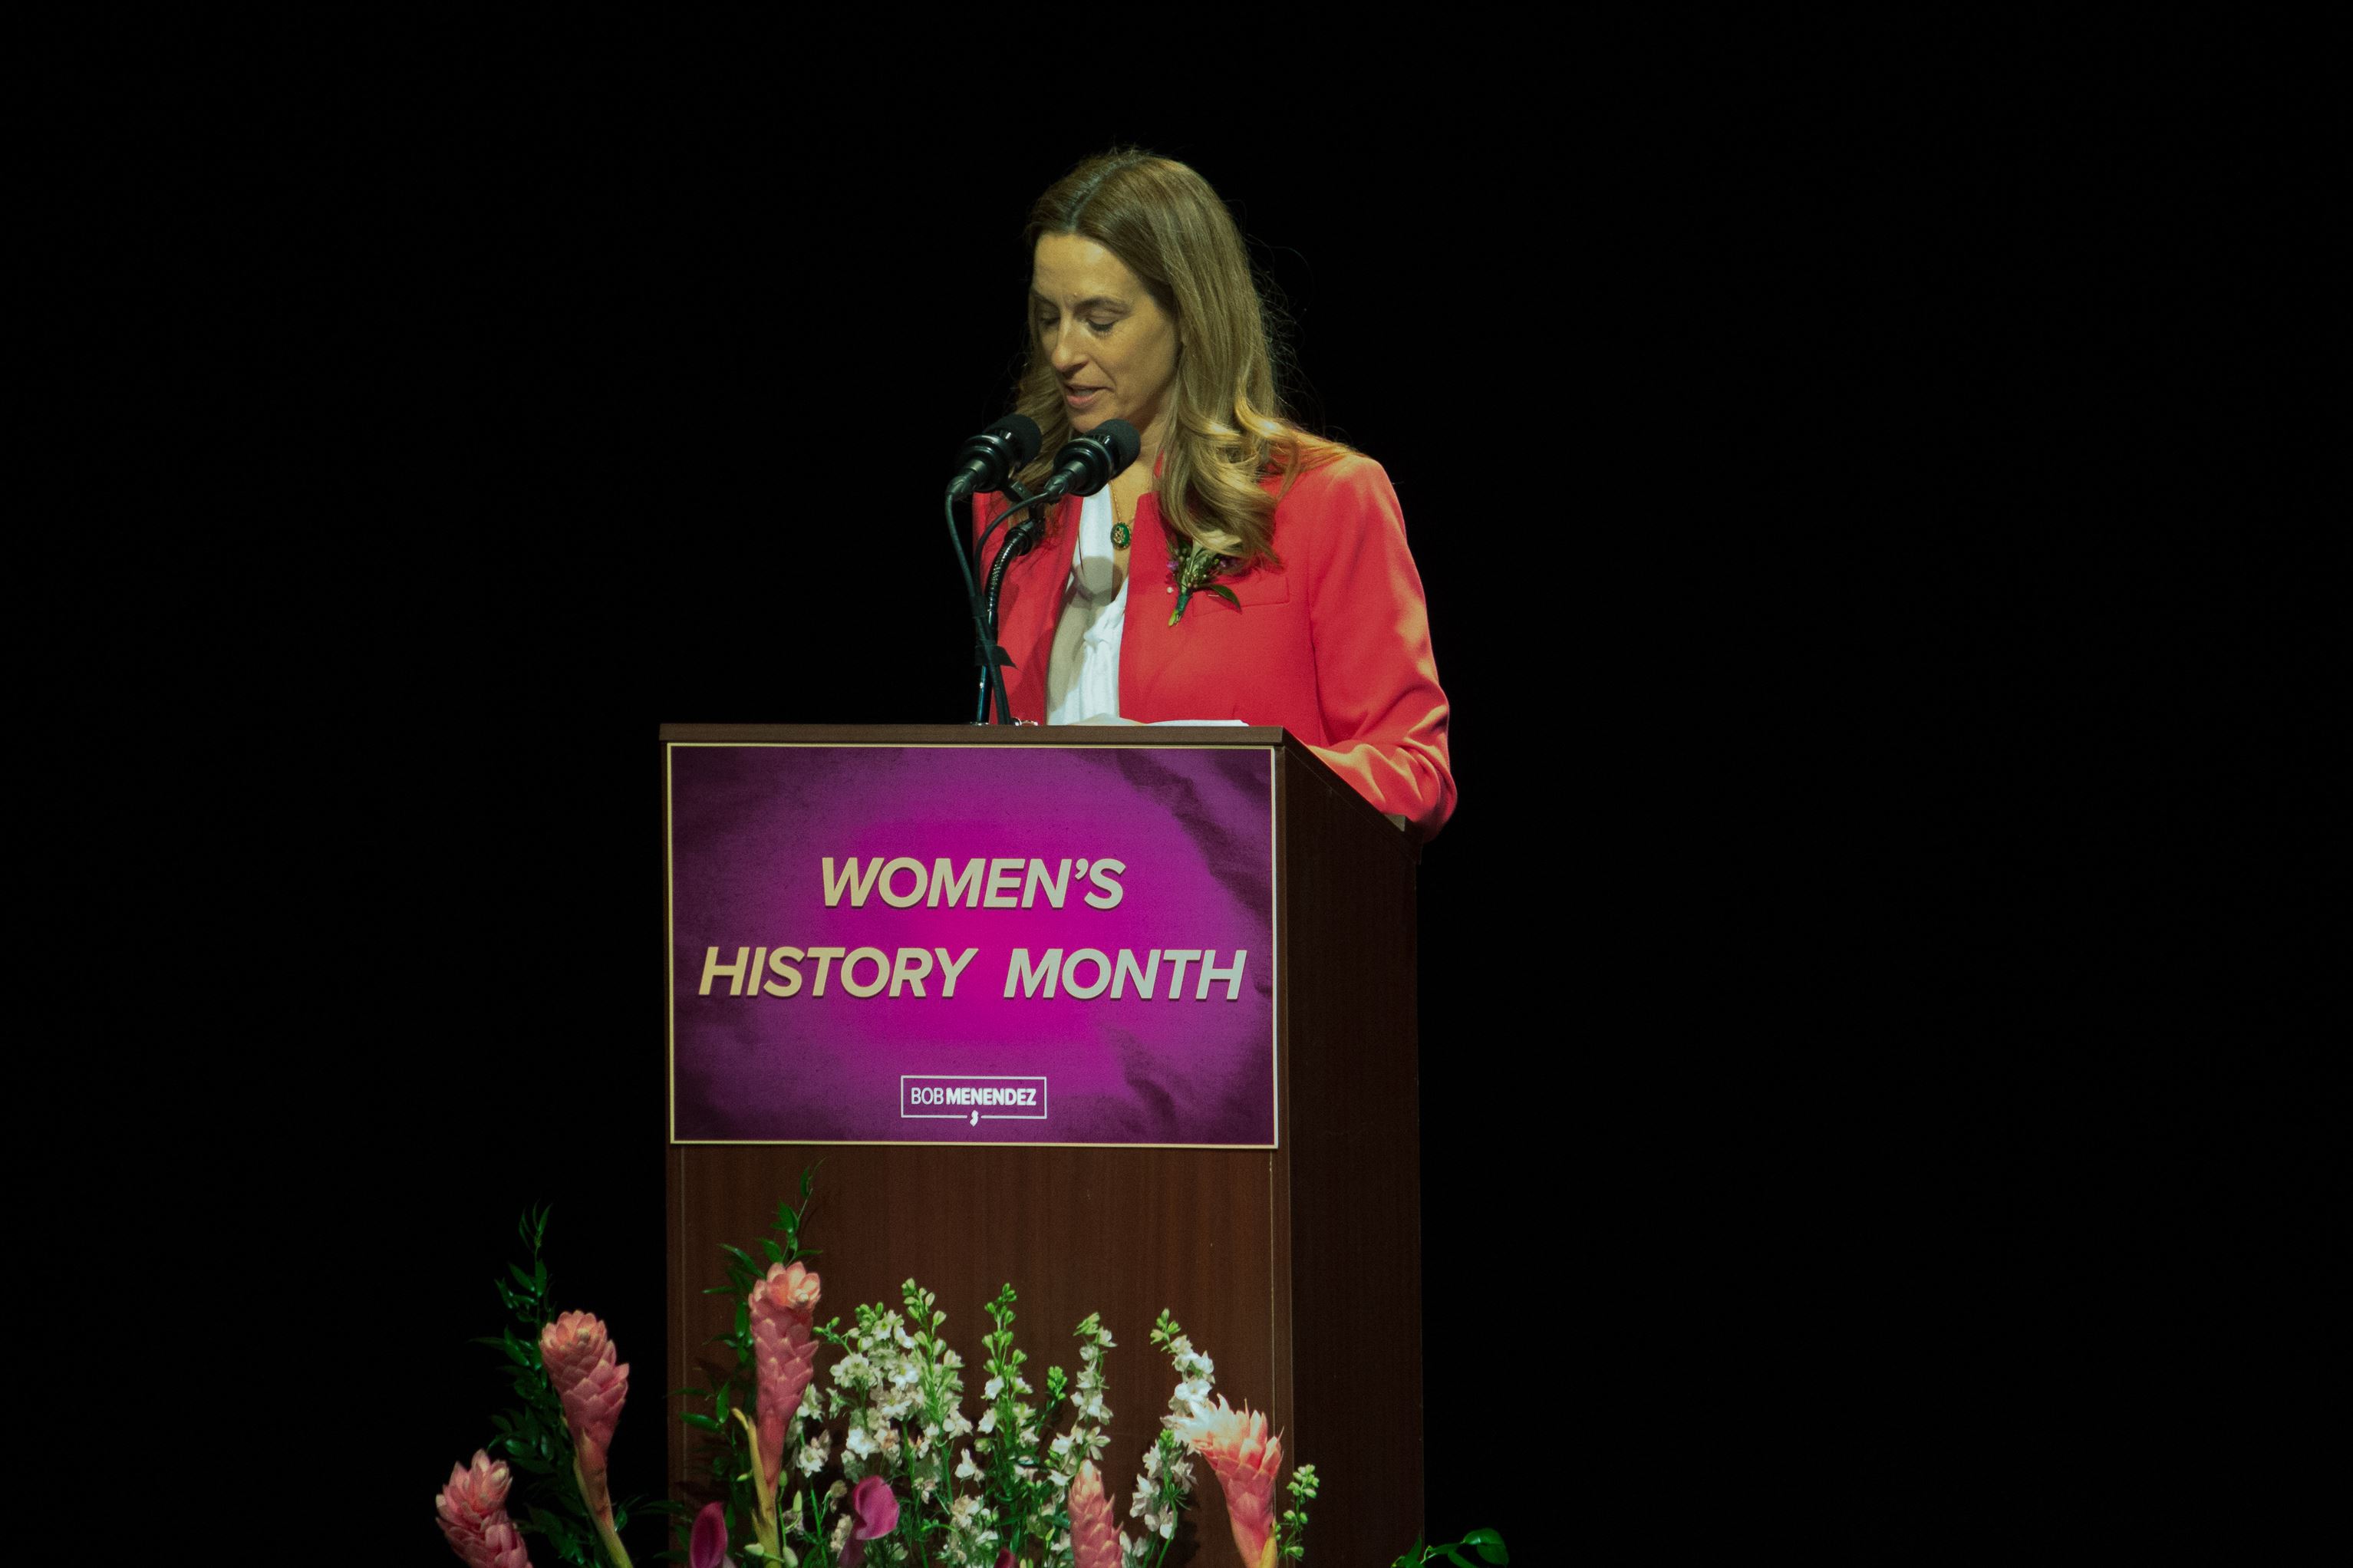 Rep. Mikie Sherill (D-N.J.) speaks at the 12th Annual Evangelina Menendez Women’s History Month Celebration.
Sal DiMaggio | The Montclarion